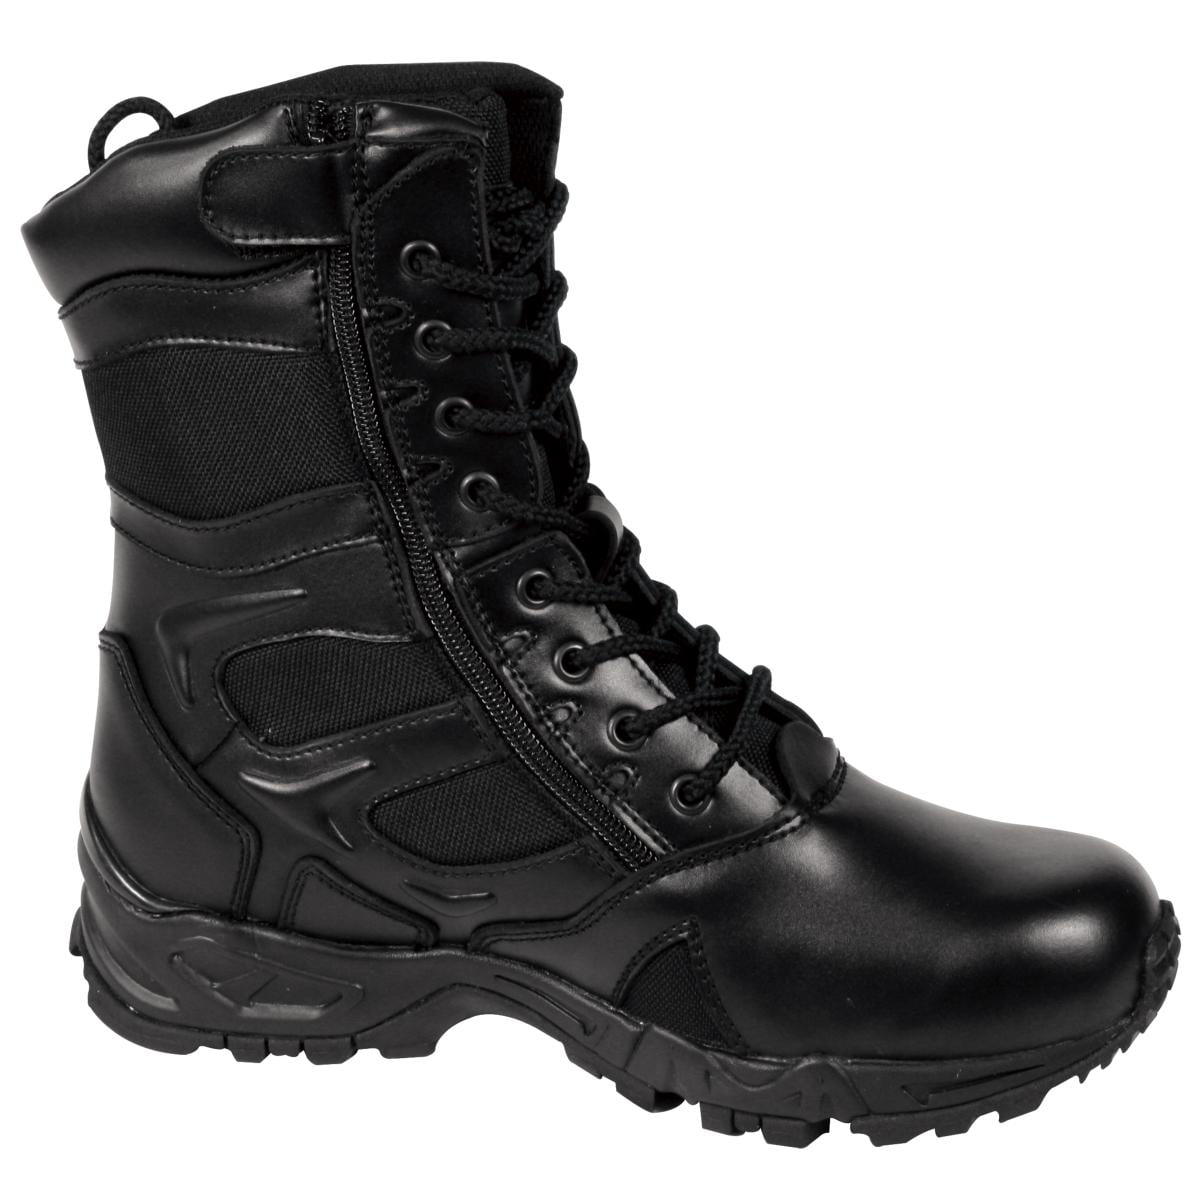 Rothco - Rothco 5358 Forced Entry Black Deployment Tactical Boots w ...